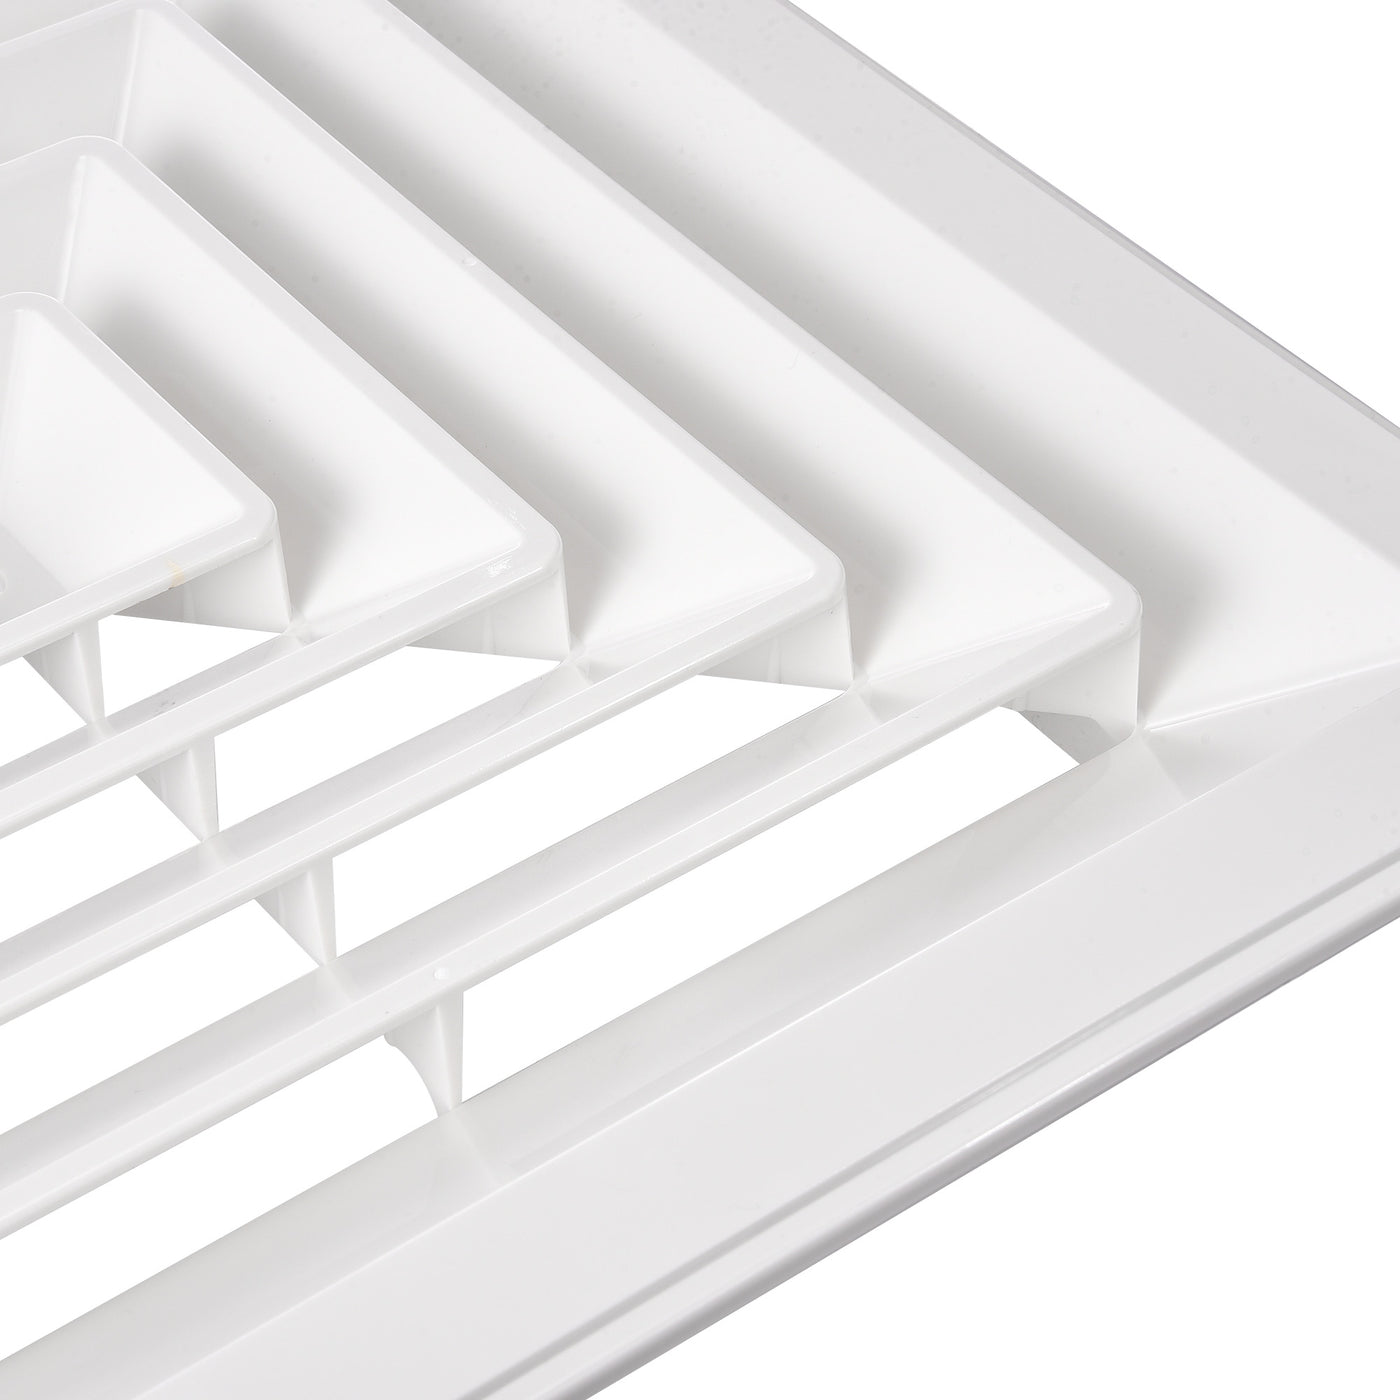 uxcell Uxcell Square Air Vent Panel, 390x390mm, Duct Mounting Plate, for Heating Cooling Ventilation System, ABS Plastic, White